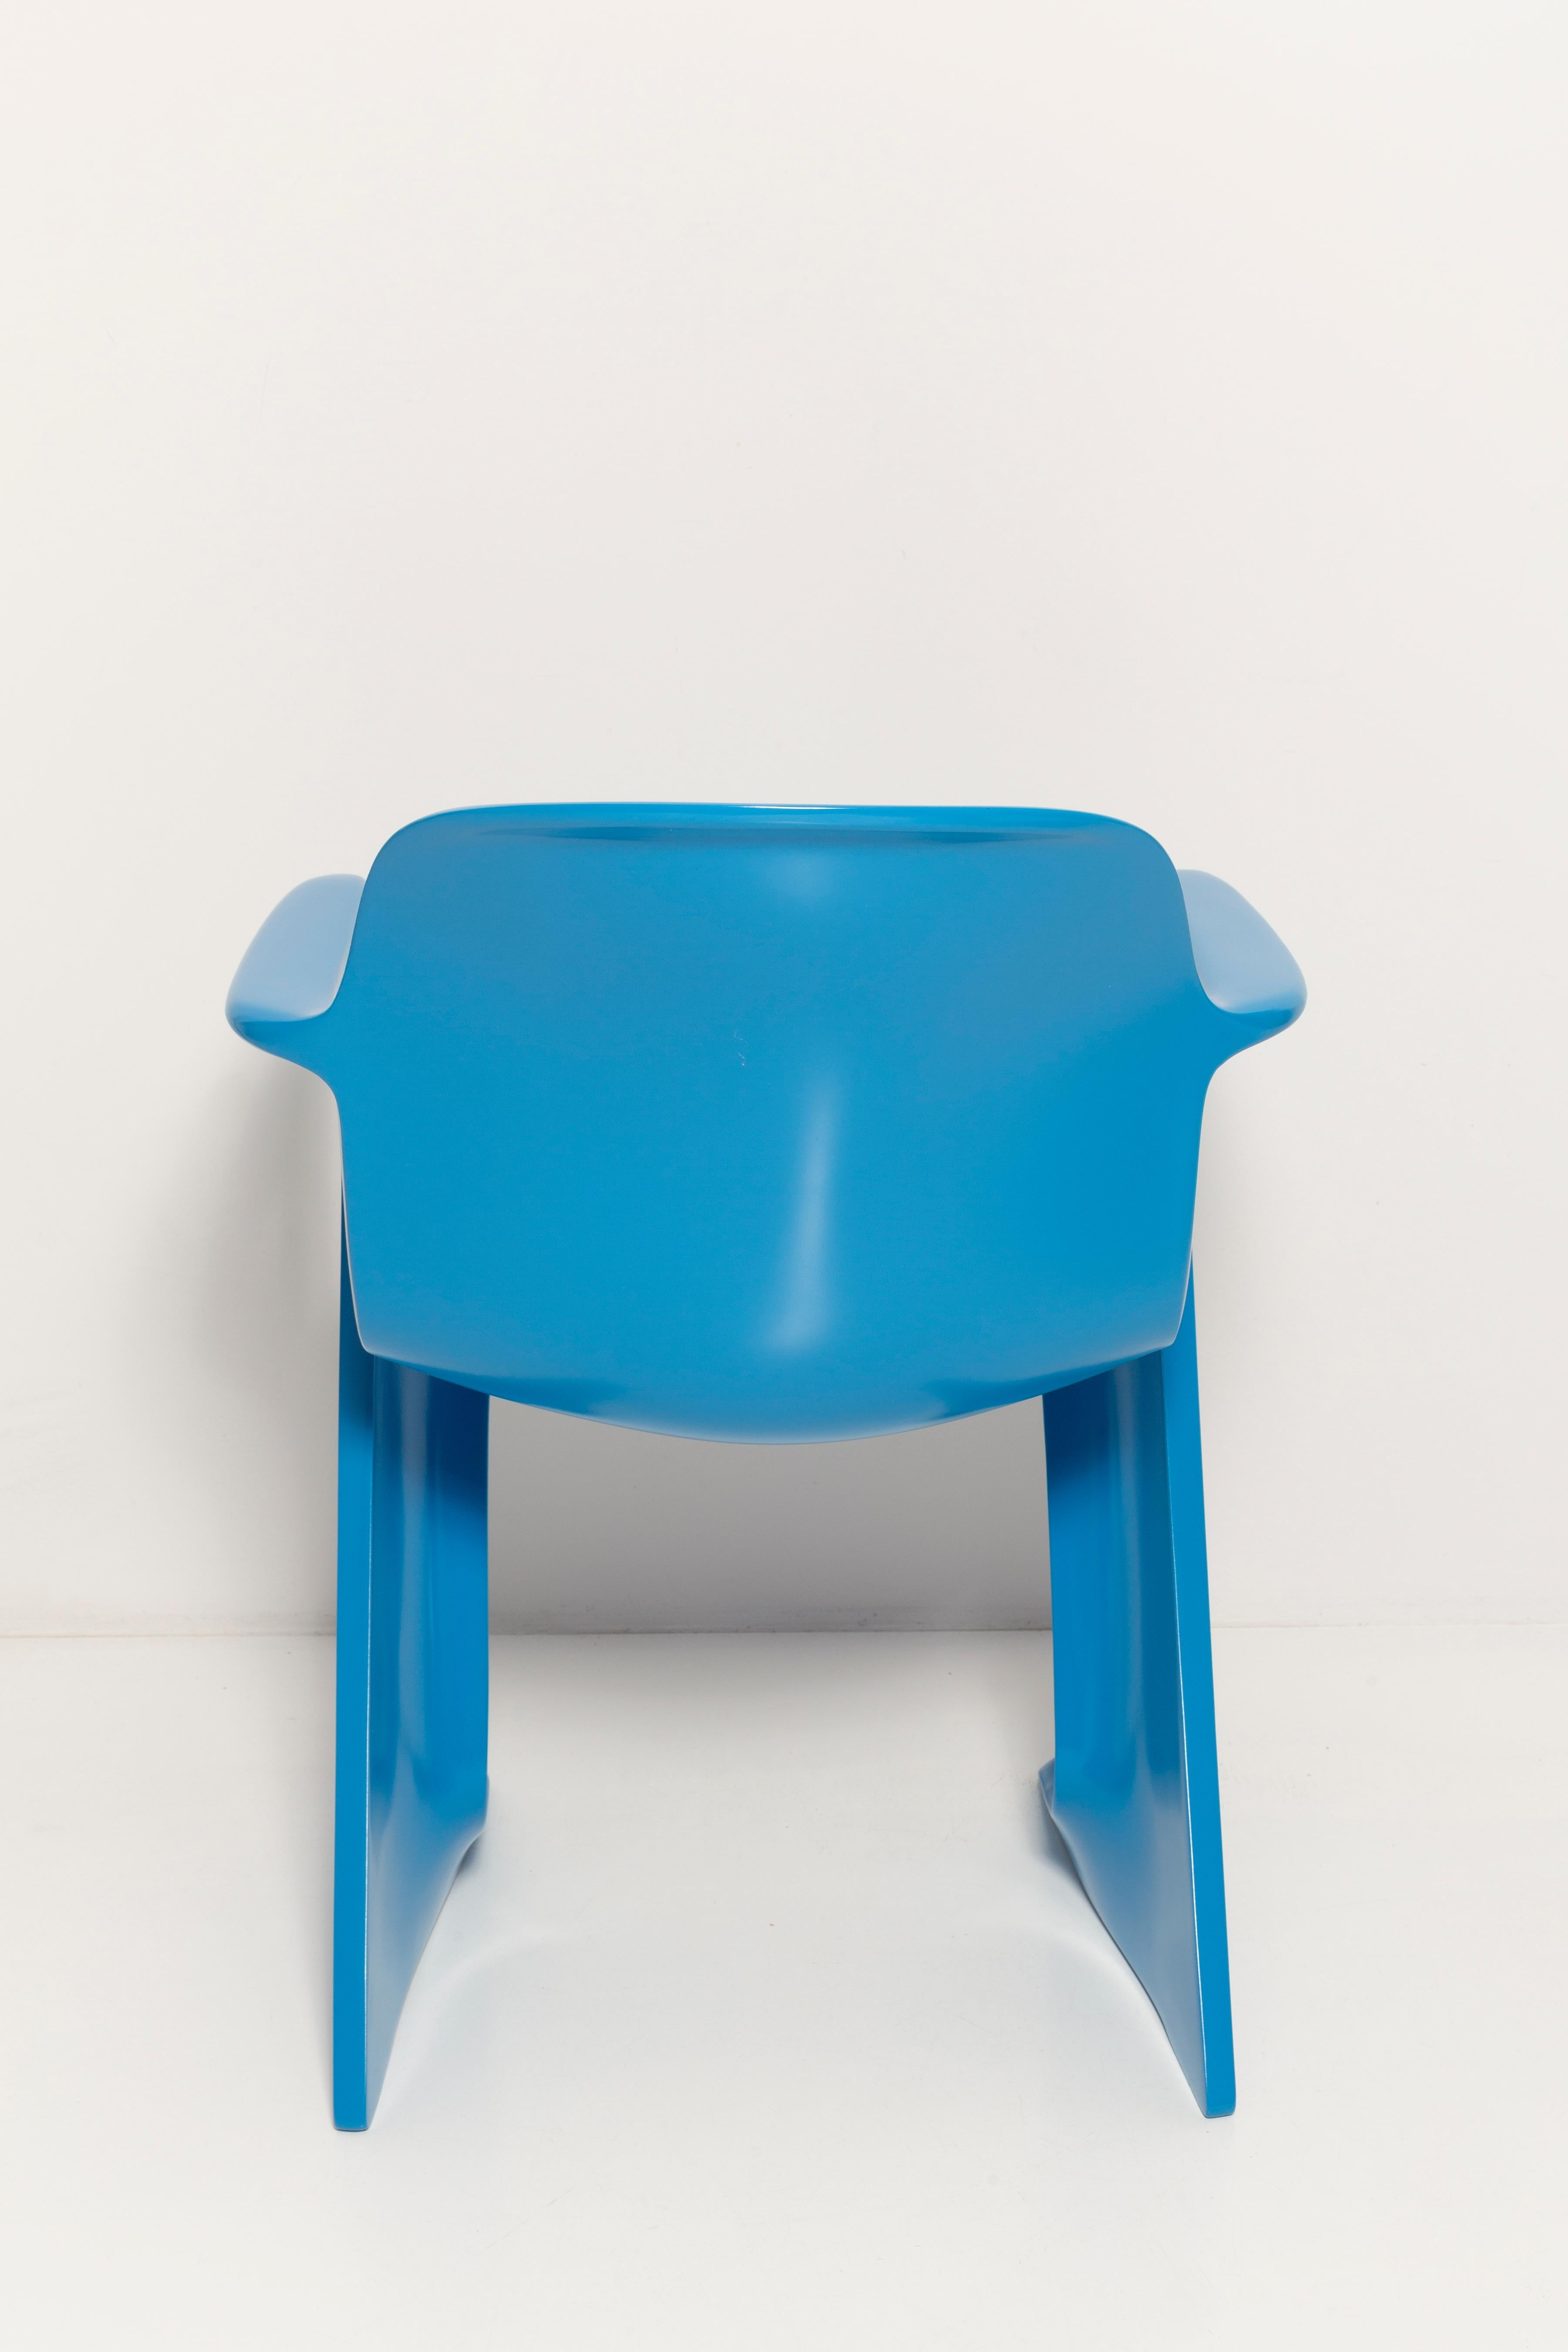 Set of Four Blue Kangaroo Chairs Designed by Ernst Moeckl, Germany, 1960s For Sale 3